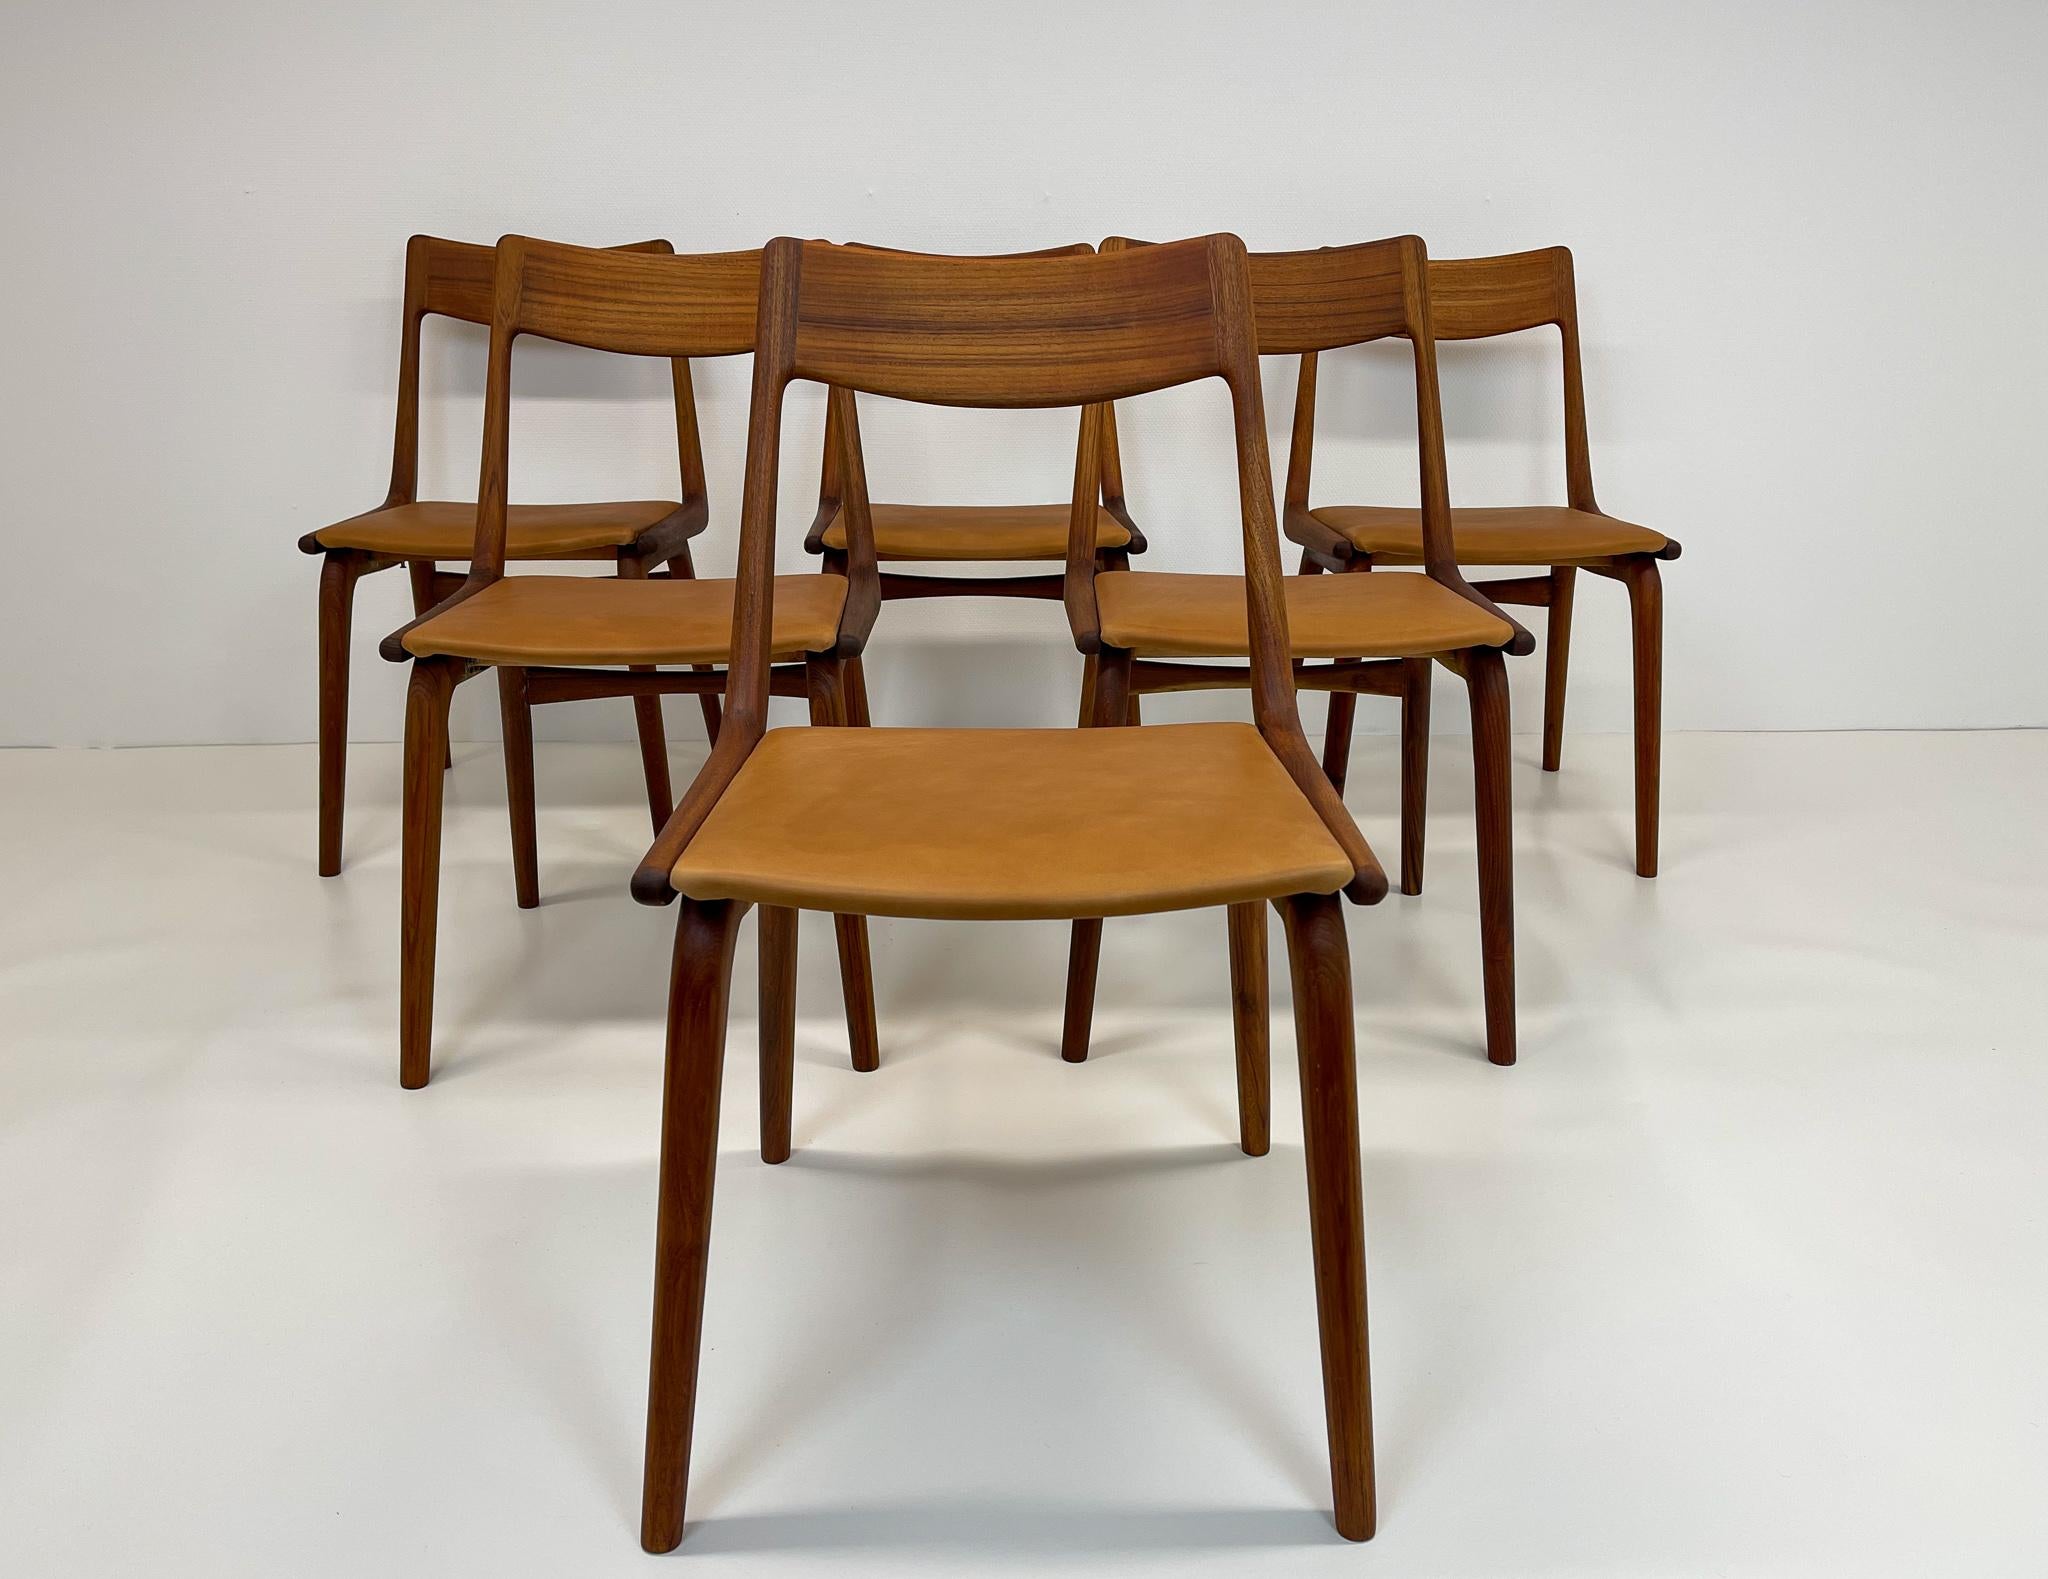 This set of six dining chairs, made in teak and all new quality brown upholstery. Designed by Alfred Christensen for Slagelse Møbelvaerk, Denmark, 1960s.

Elegant set of six Danish dining chairs, with a teak frame. Seen from the side, the seat's